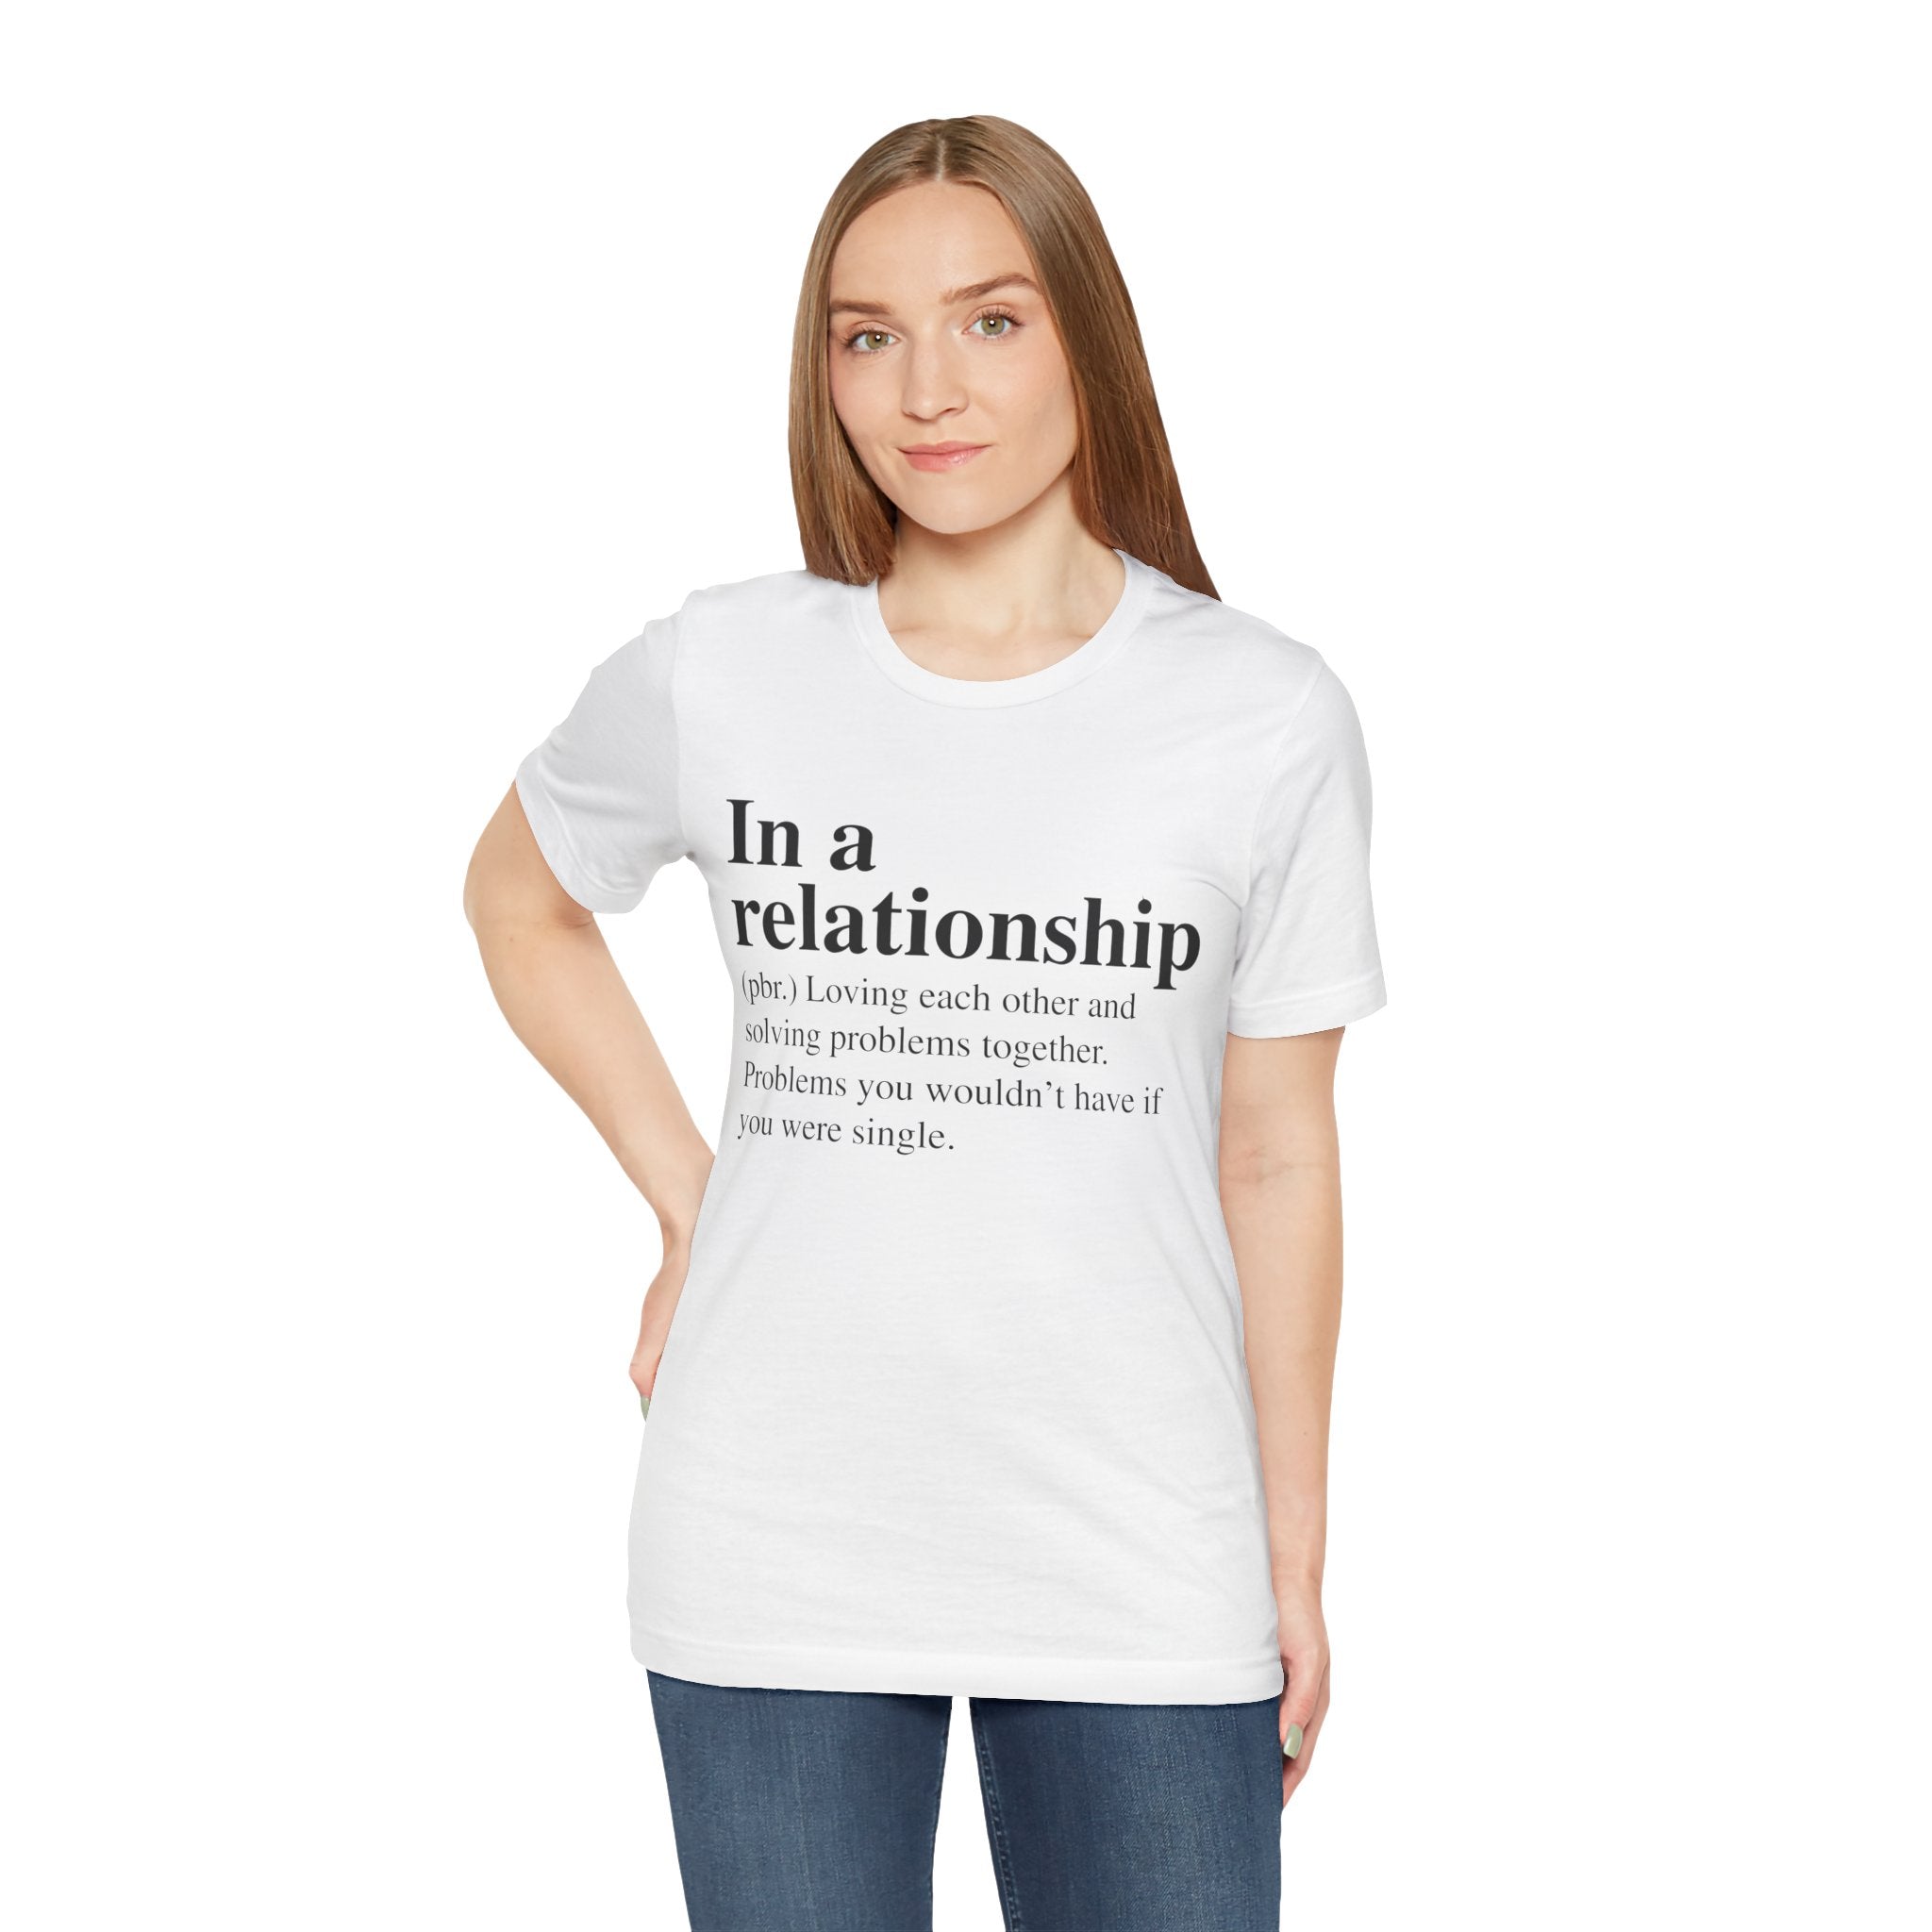 Woman in a soft cotton In a Relationship T-Shirt with text "in a relationship" and a humorous definition printed below, standing against a plain background.